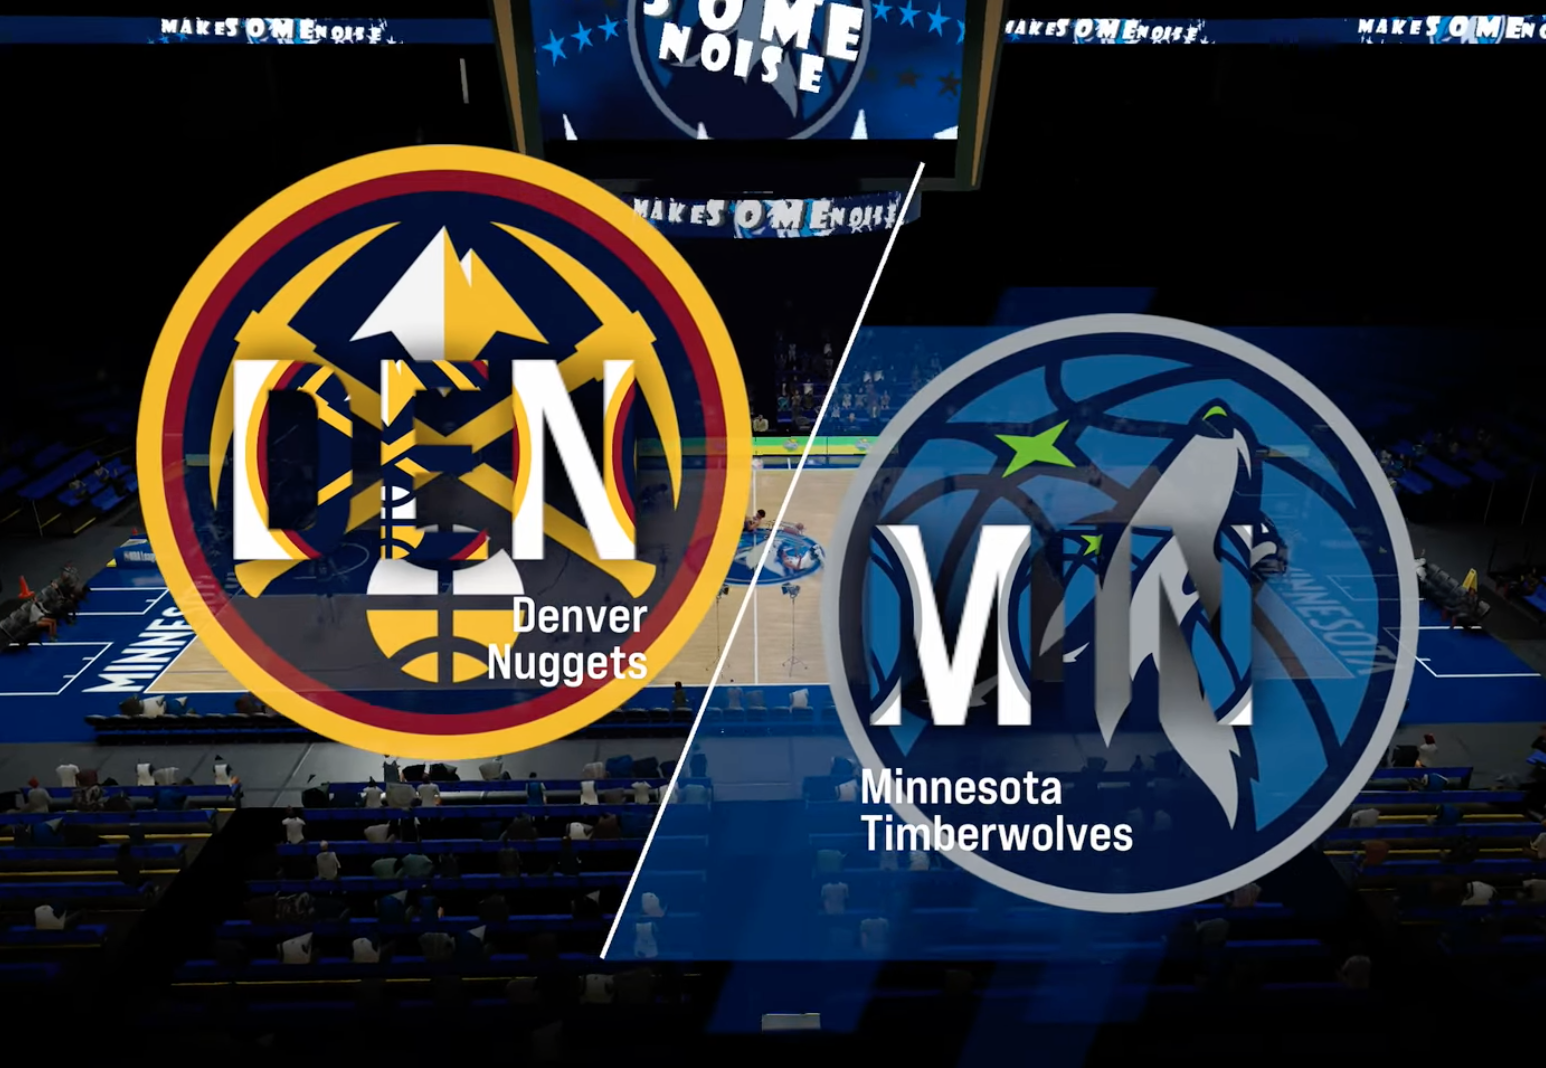 A screen capture from NBA2K24 featuring the Denver Nuggets and Minnesota Timberwolves.